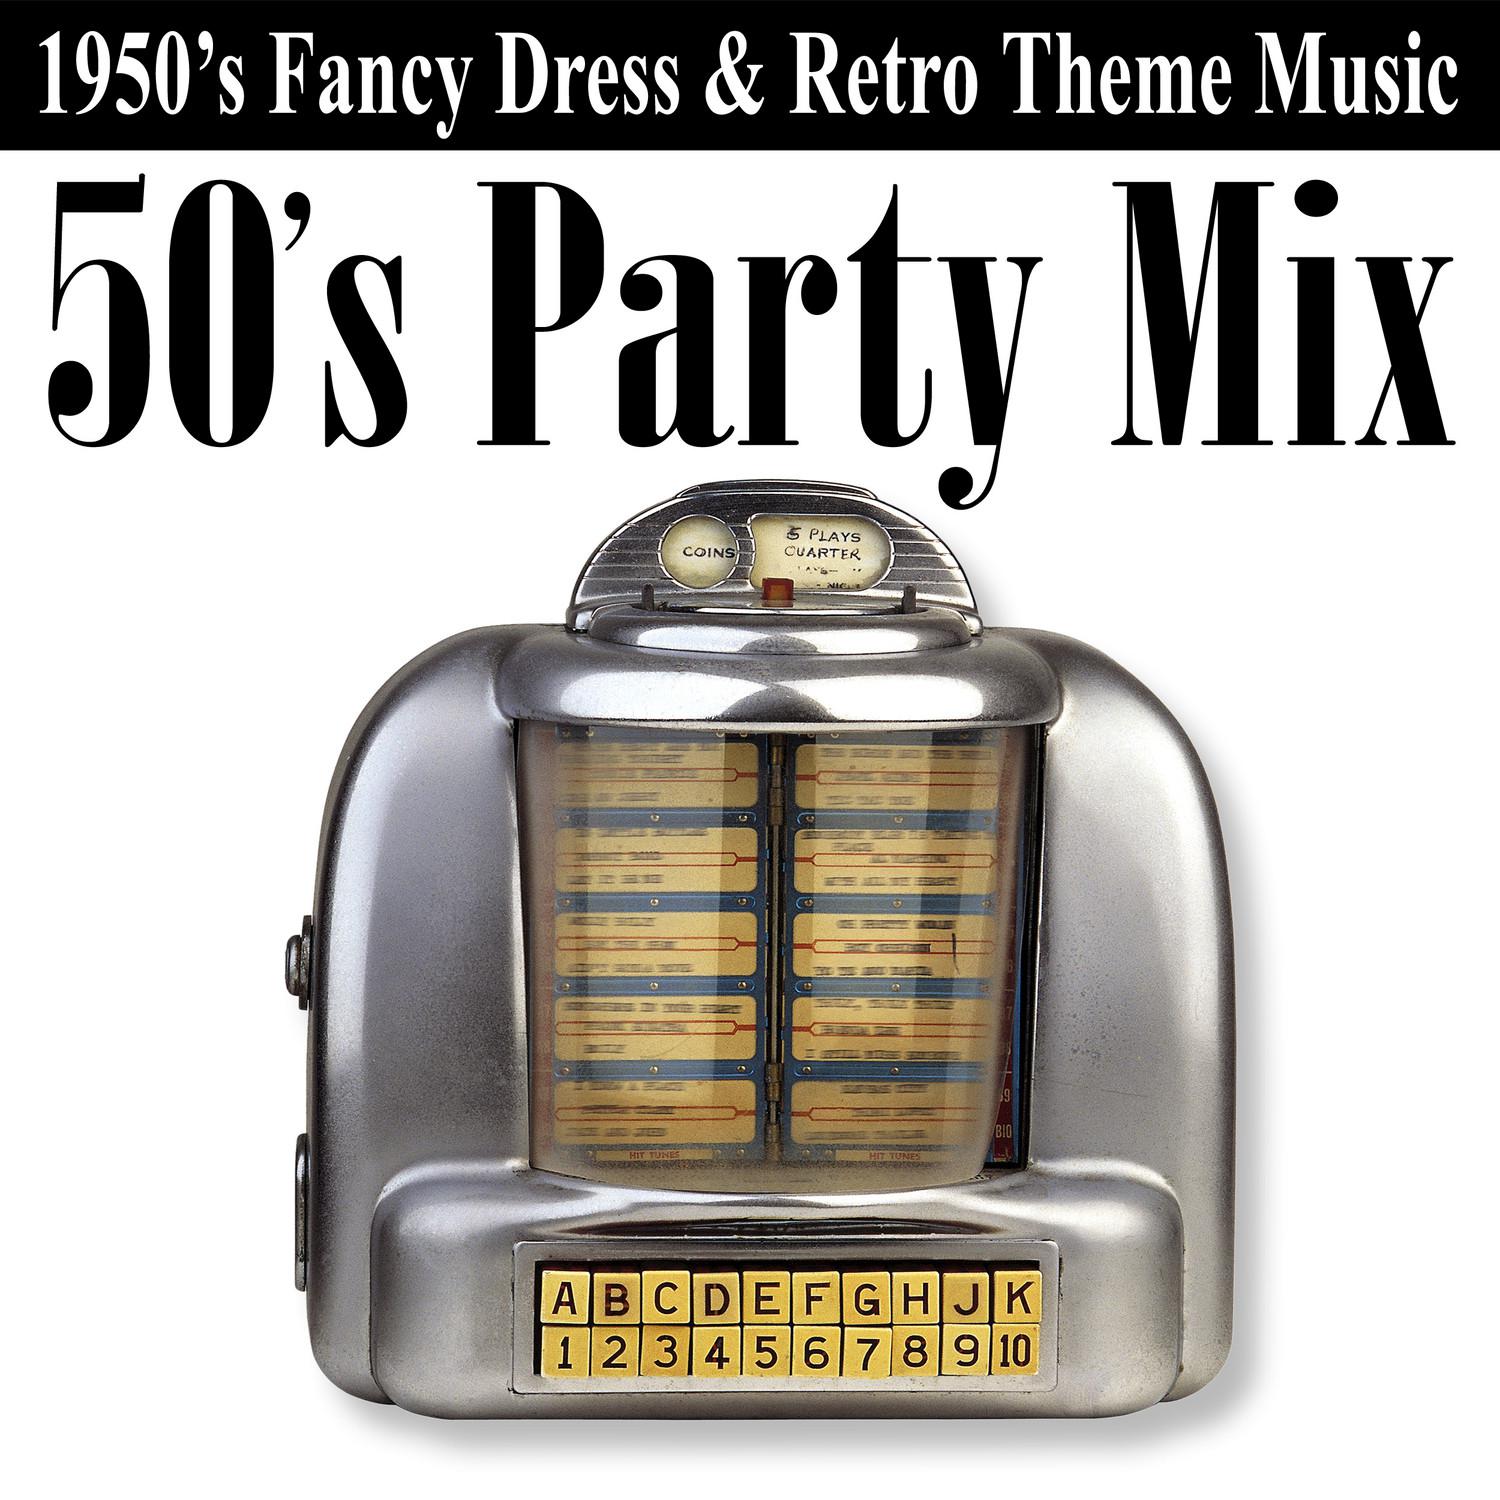 Cherry Pink & Apple Blossom White (50's Party Mix)